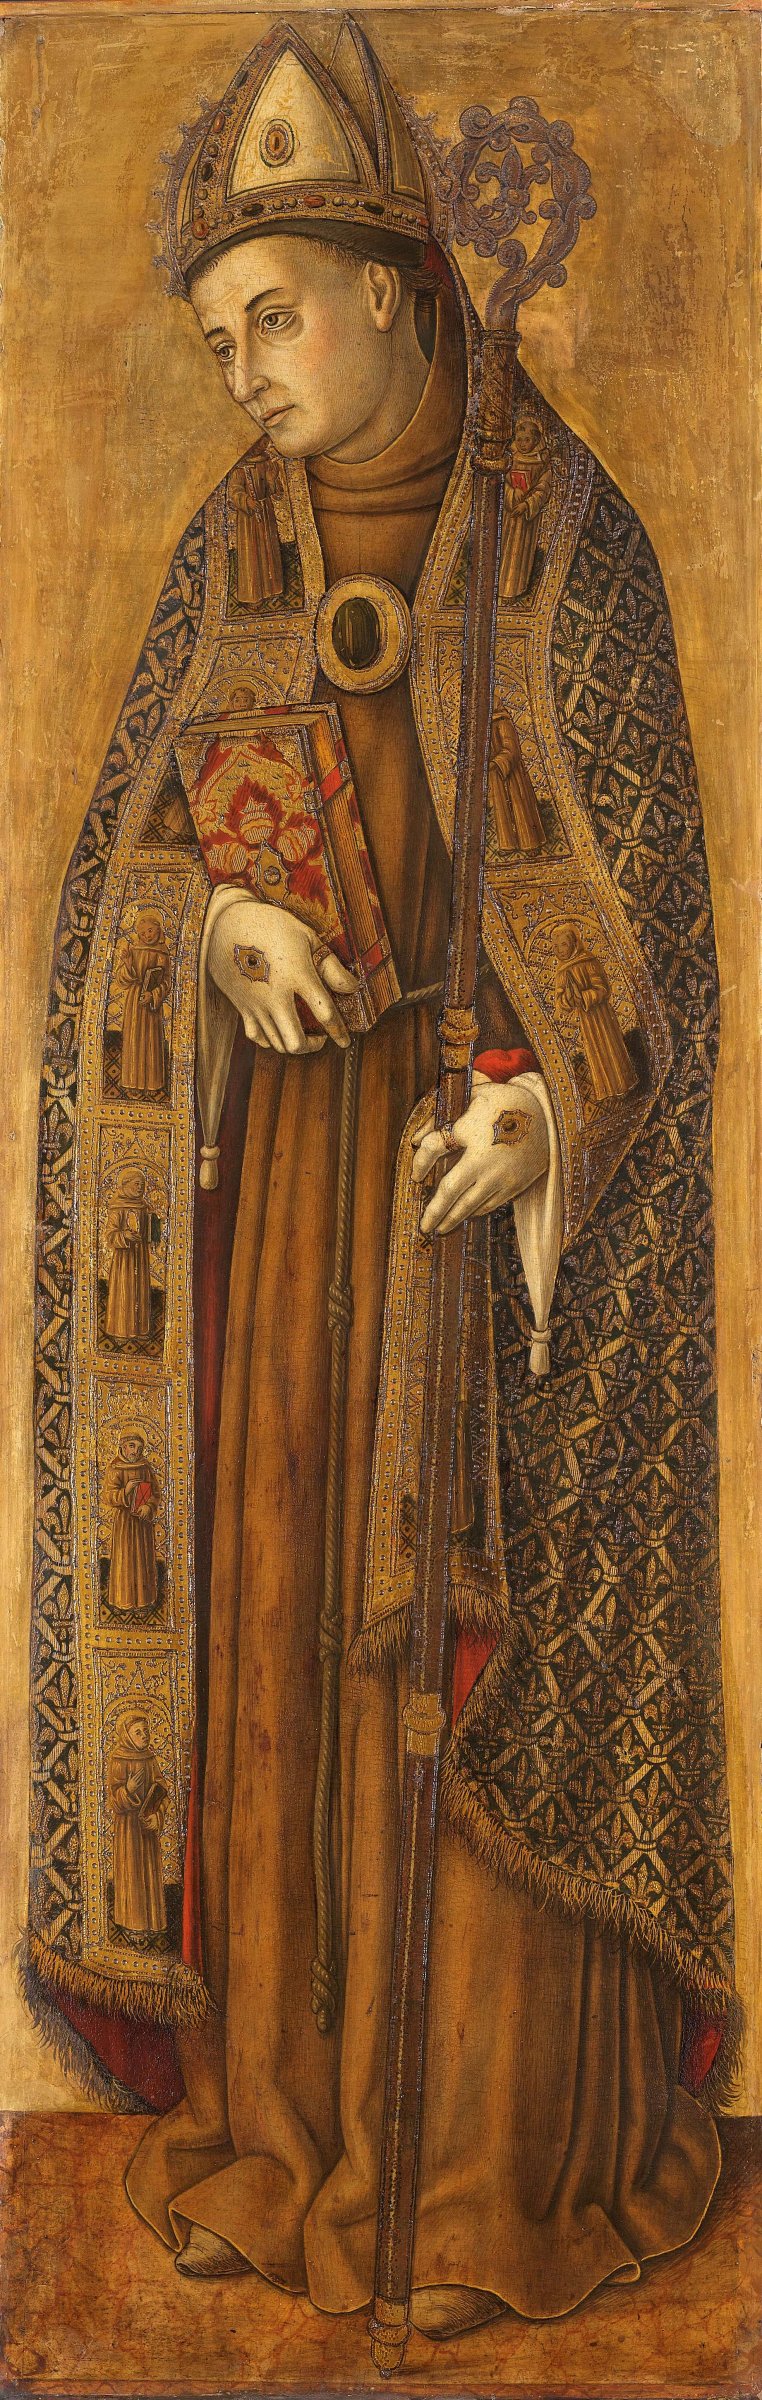 St Louis of France, Vittore Crivelli, 1481 - 1502